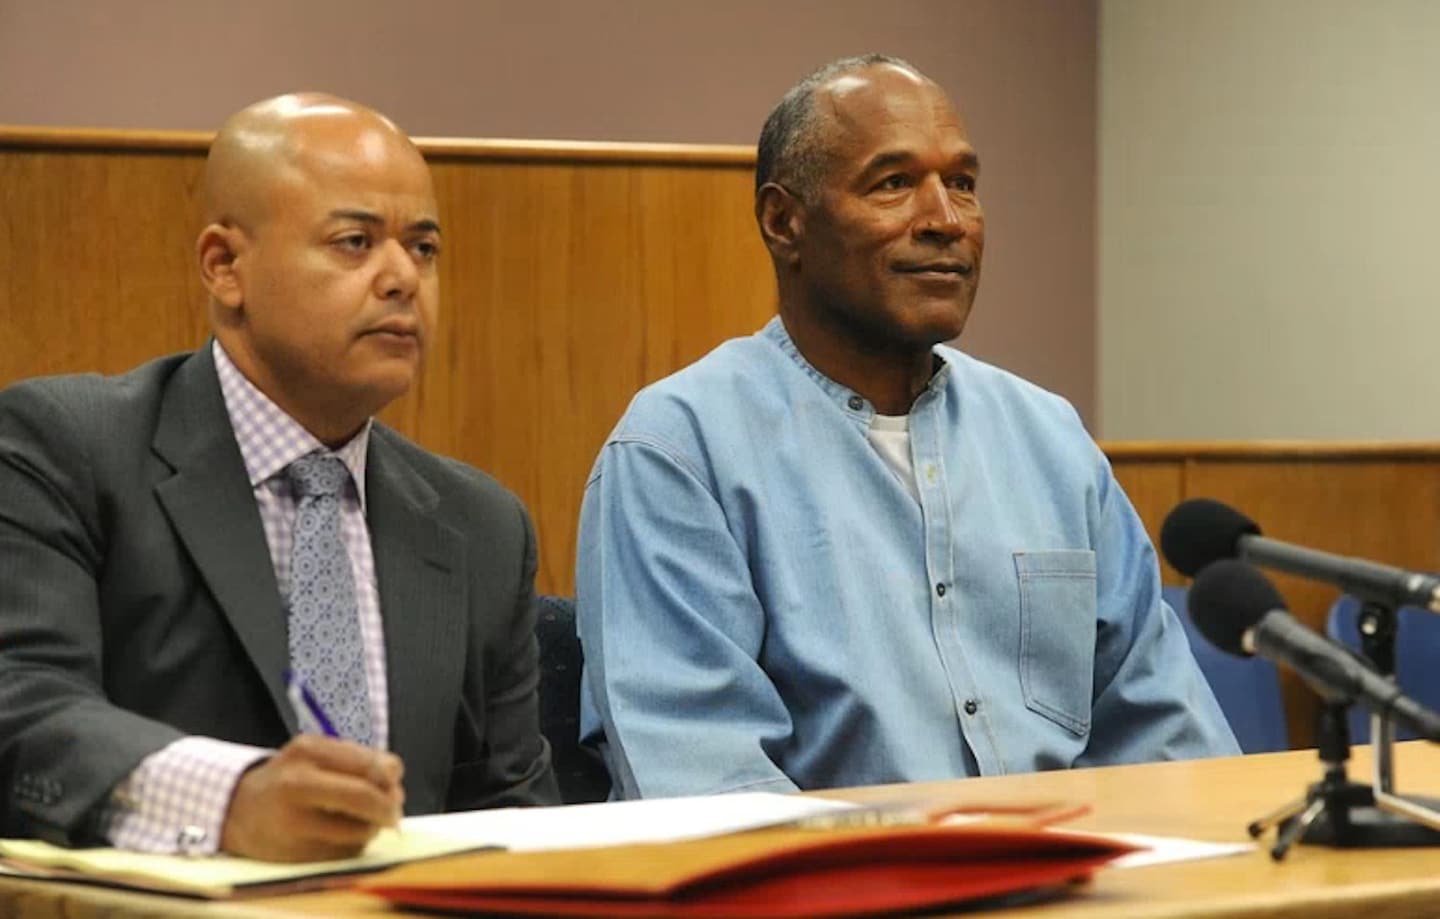 O.J. Simpson, football great whose trial for murder became a phenomenon, dies at 76